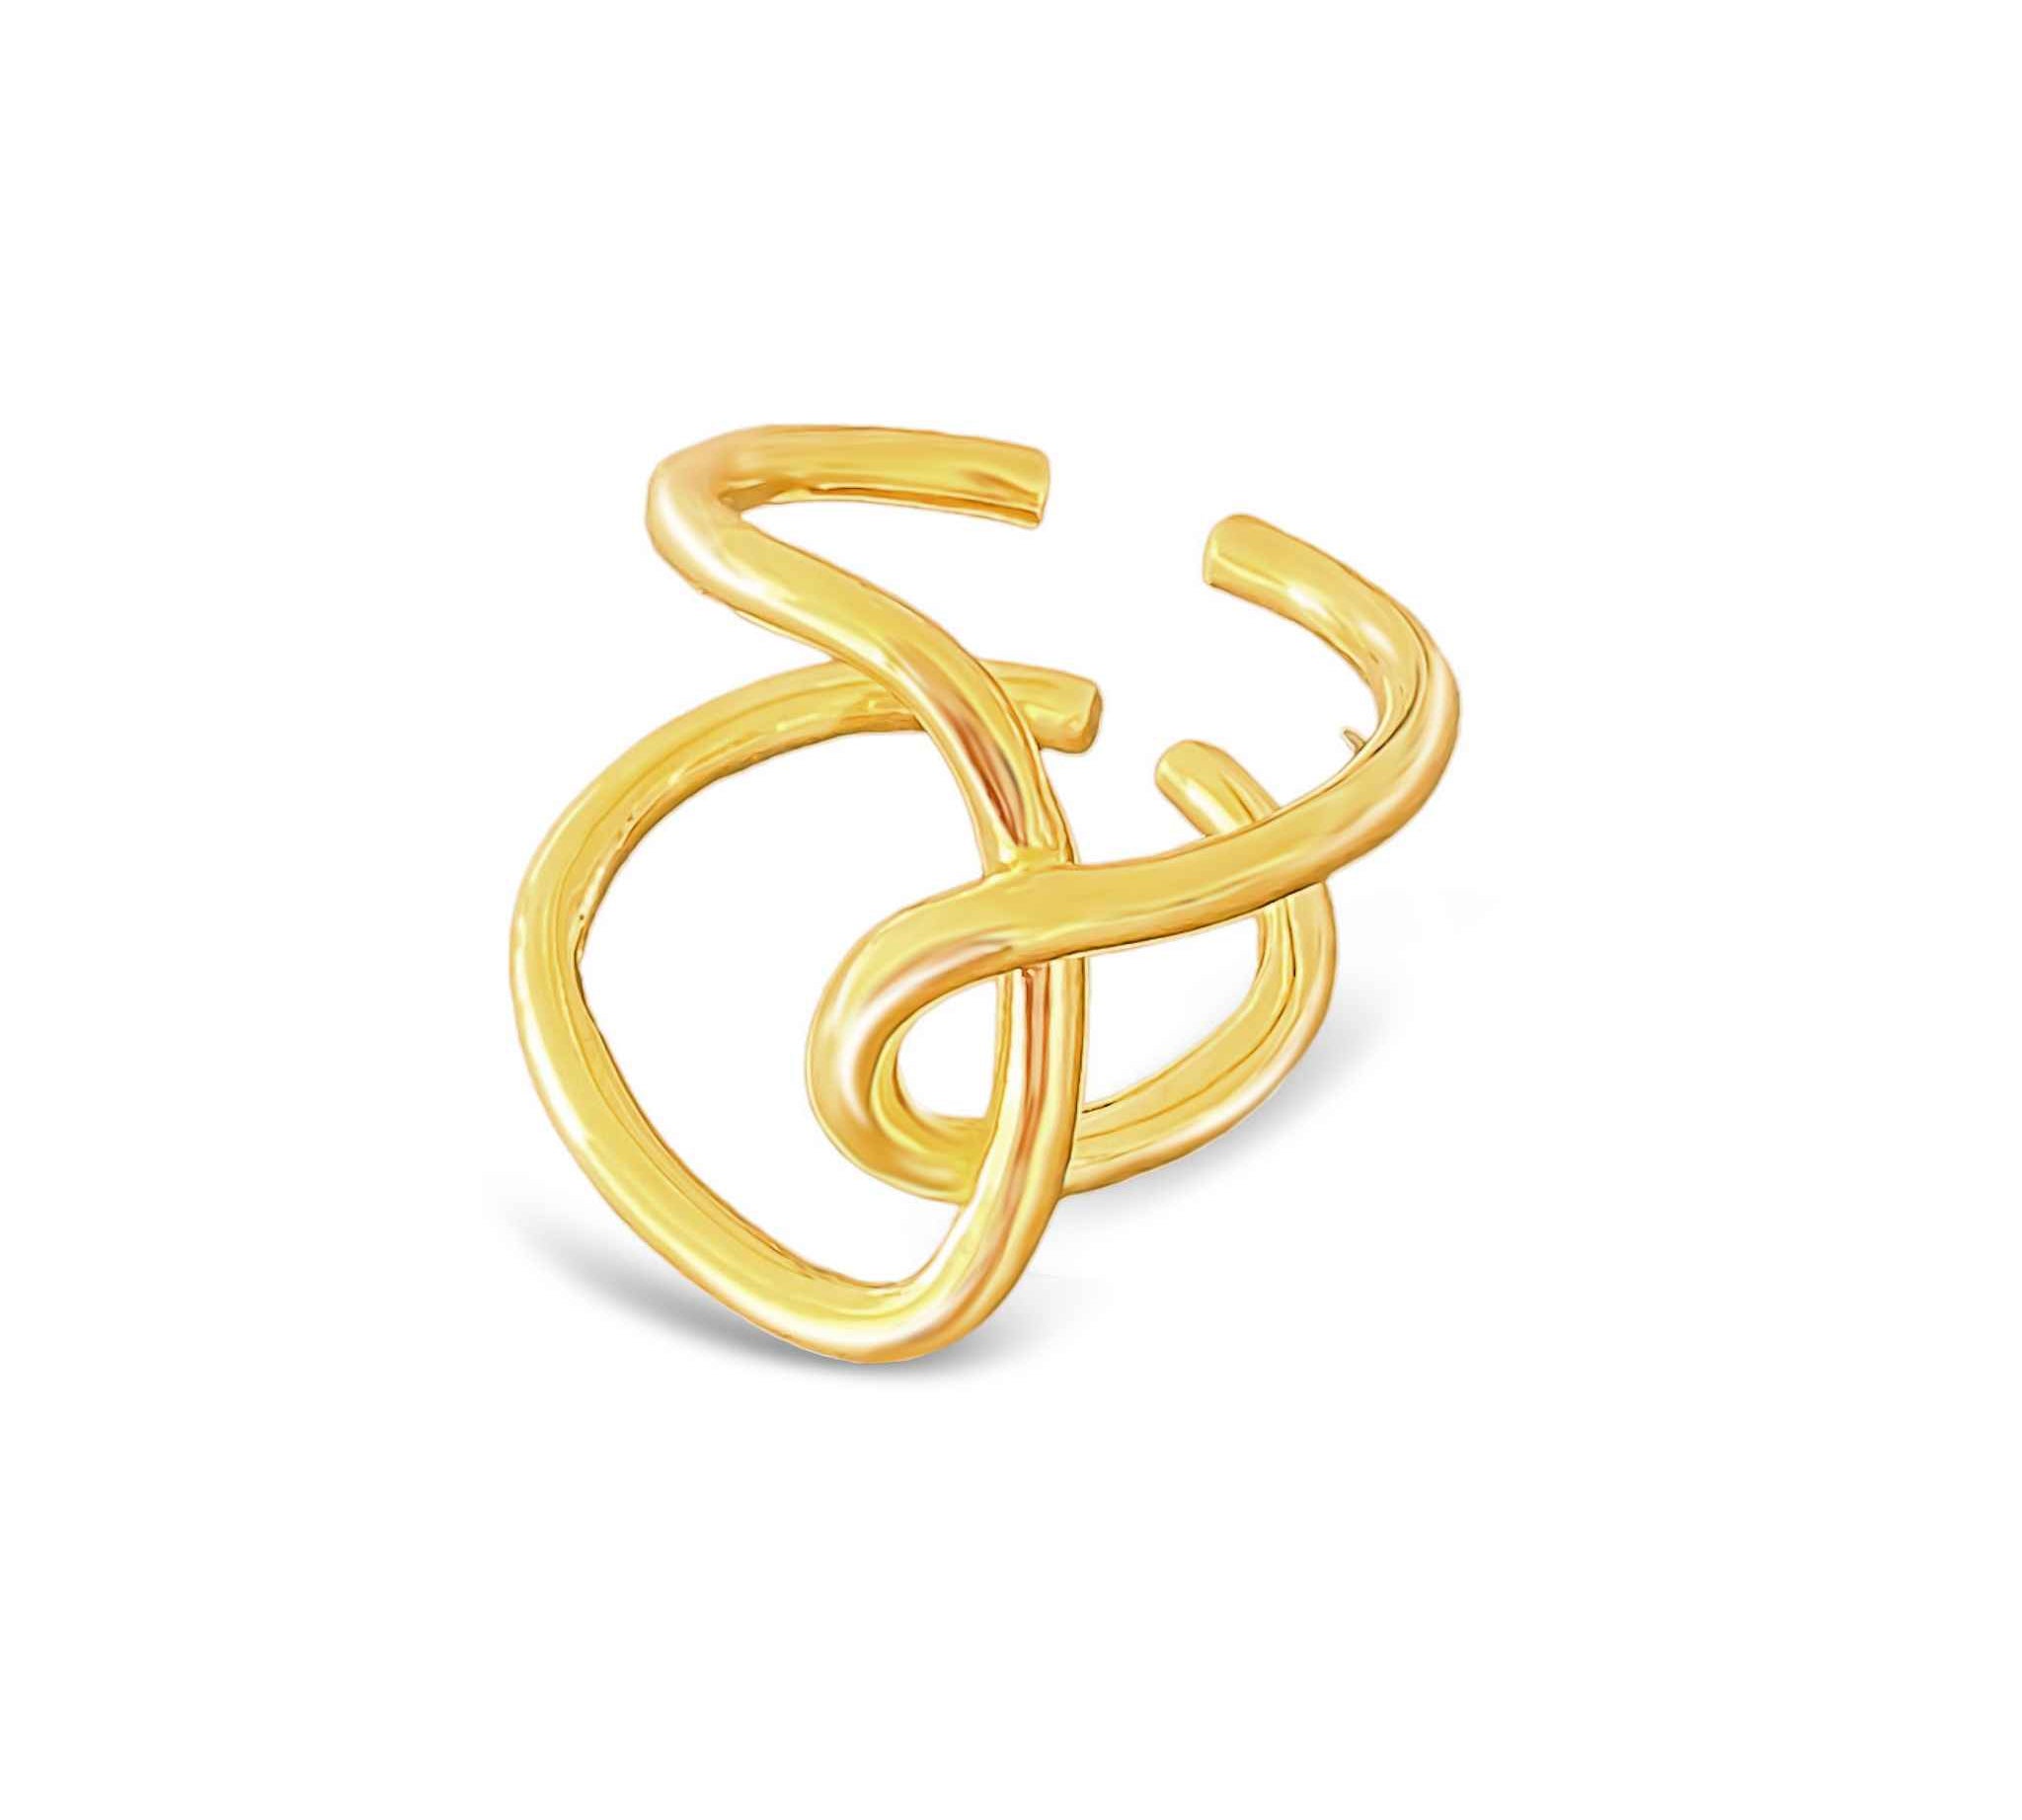 18k gold plated sterling silver adjustable Asymmetric Twist Ring by Alessandra James.